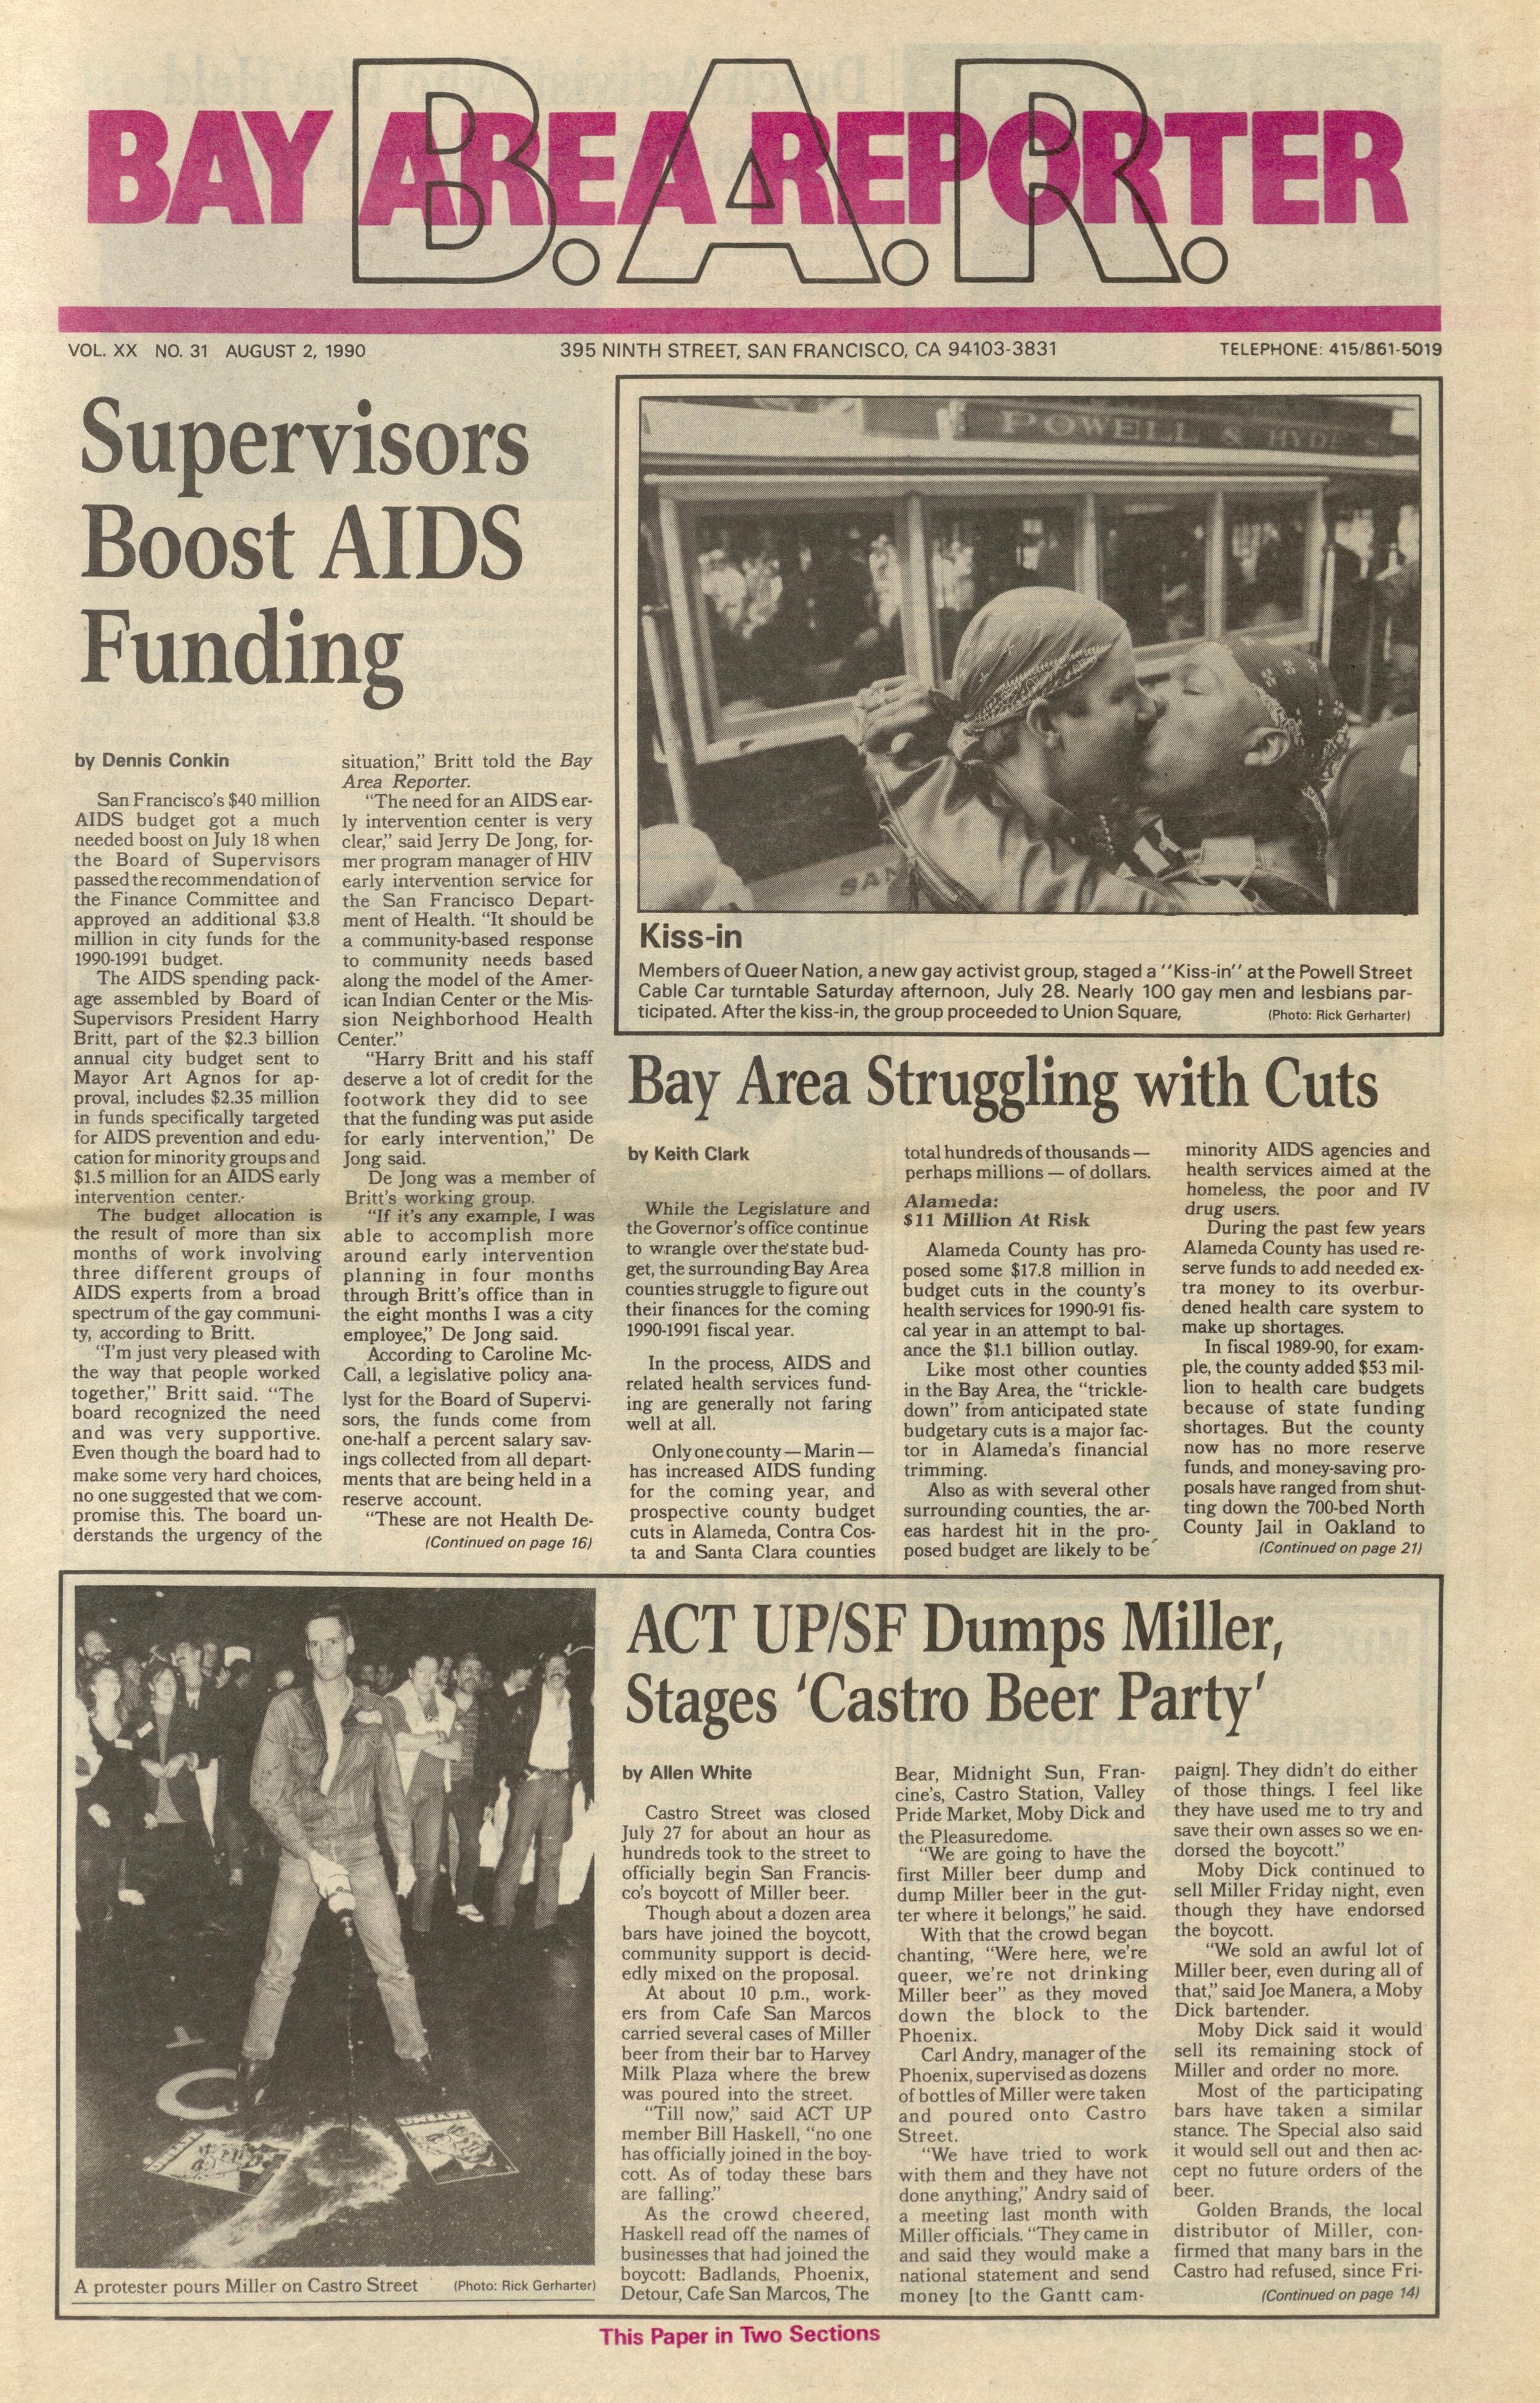  Vol. 20, No. 31, August 2, 1990.   Full Issue   